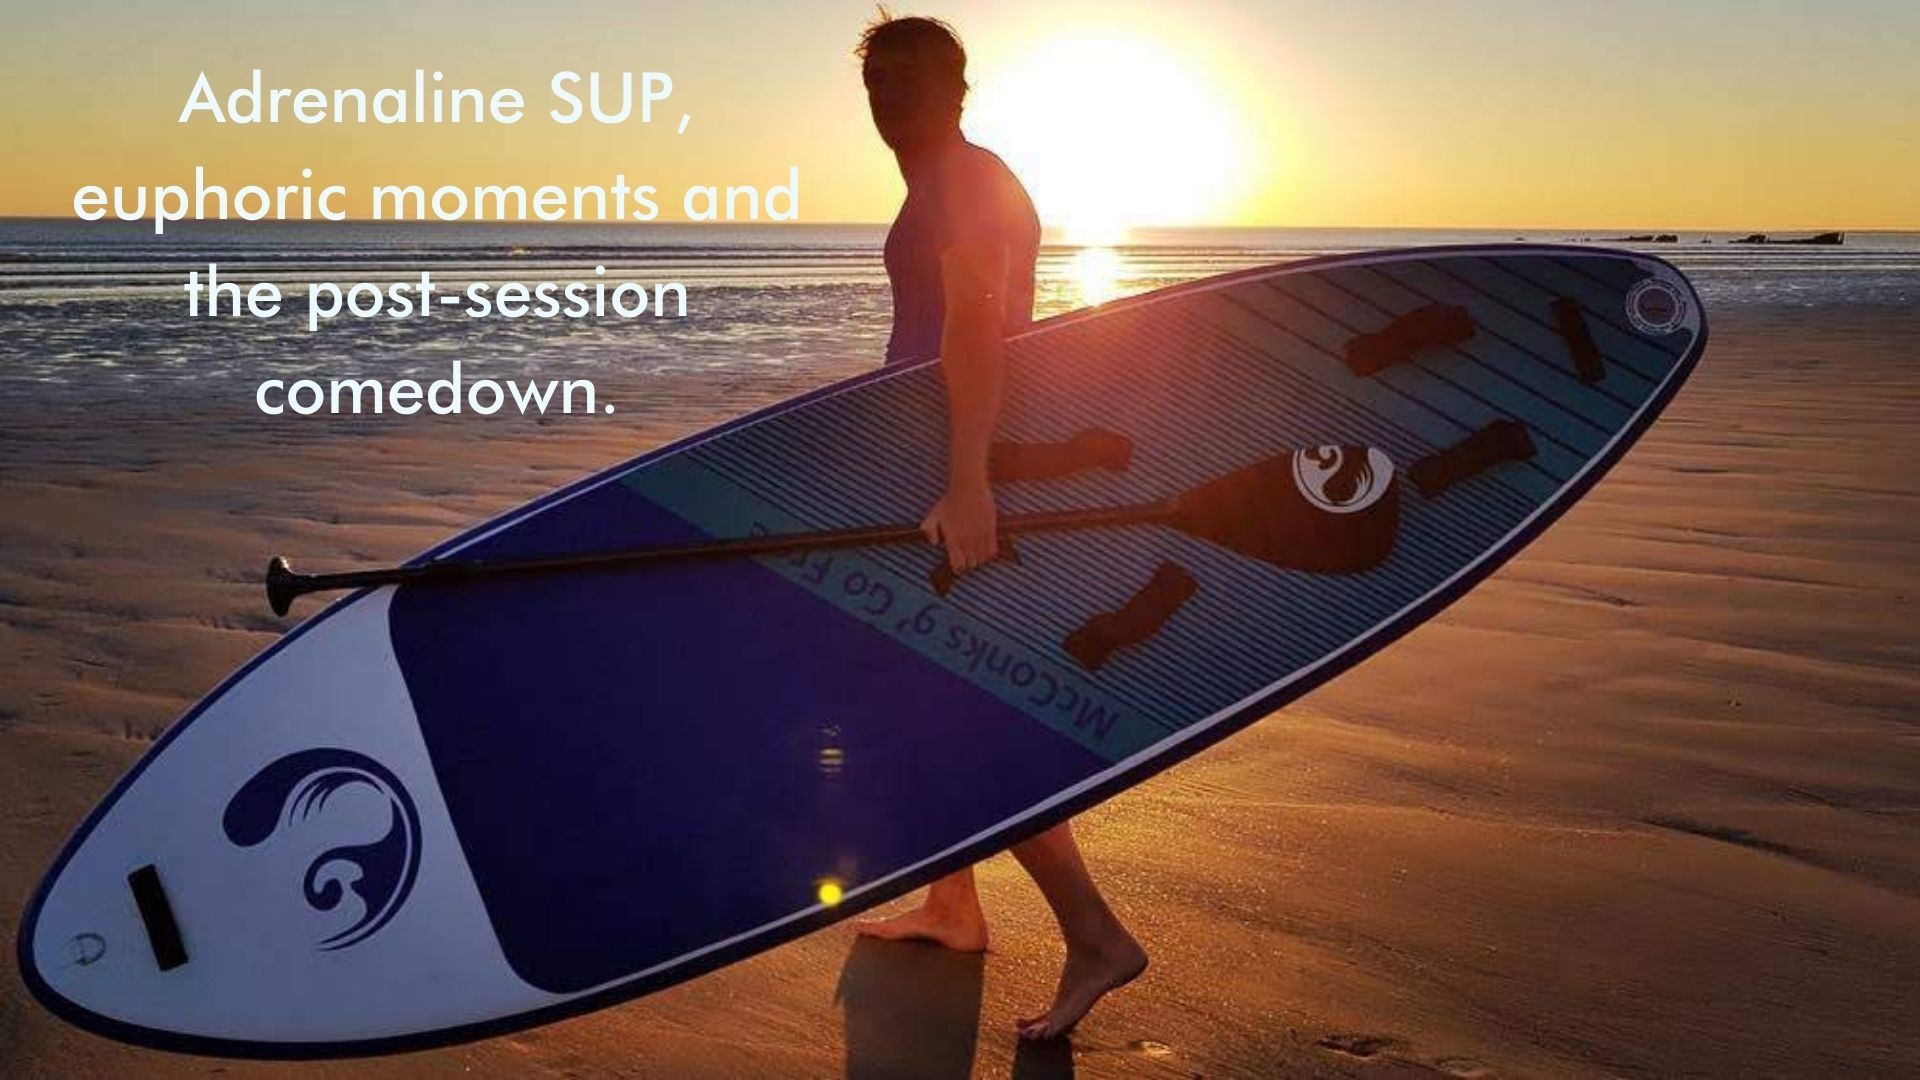 You are currently viewing Adrenaline SUP, euphoric moments and the post-session comedown.